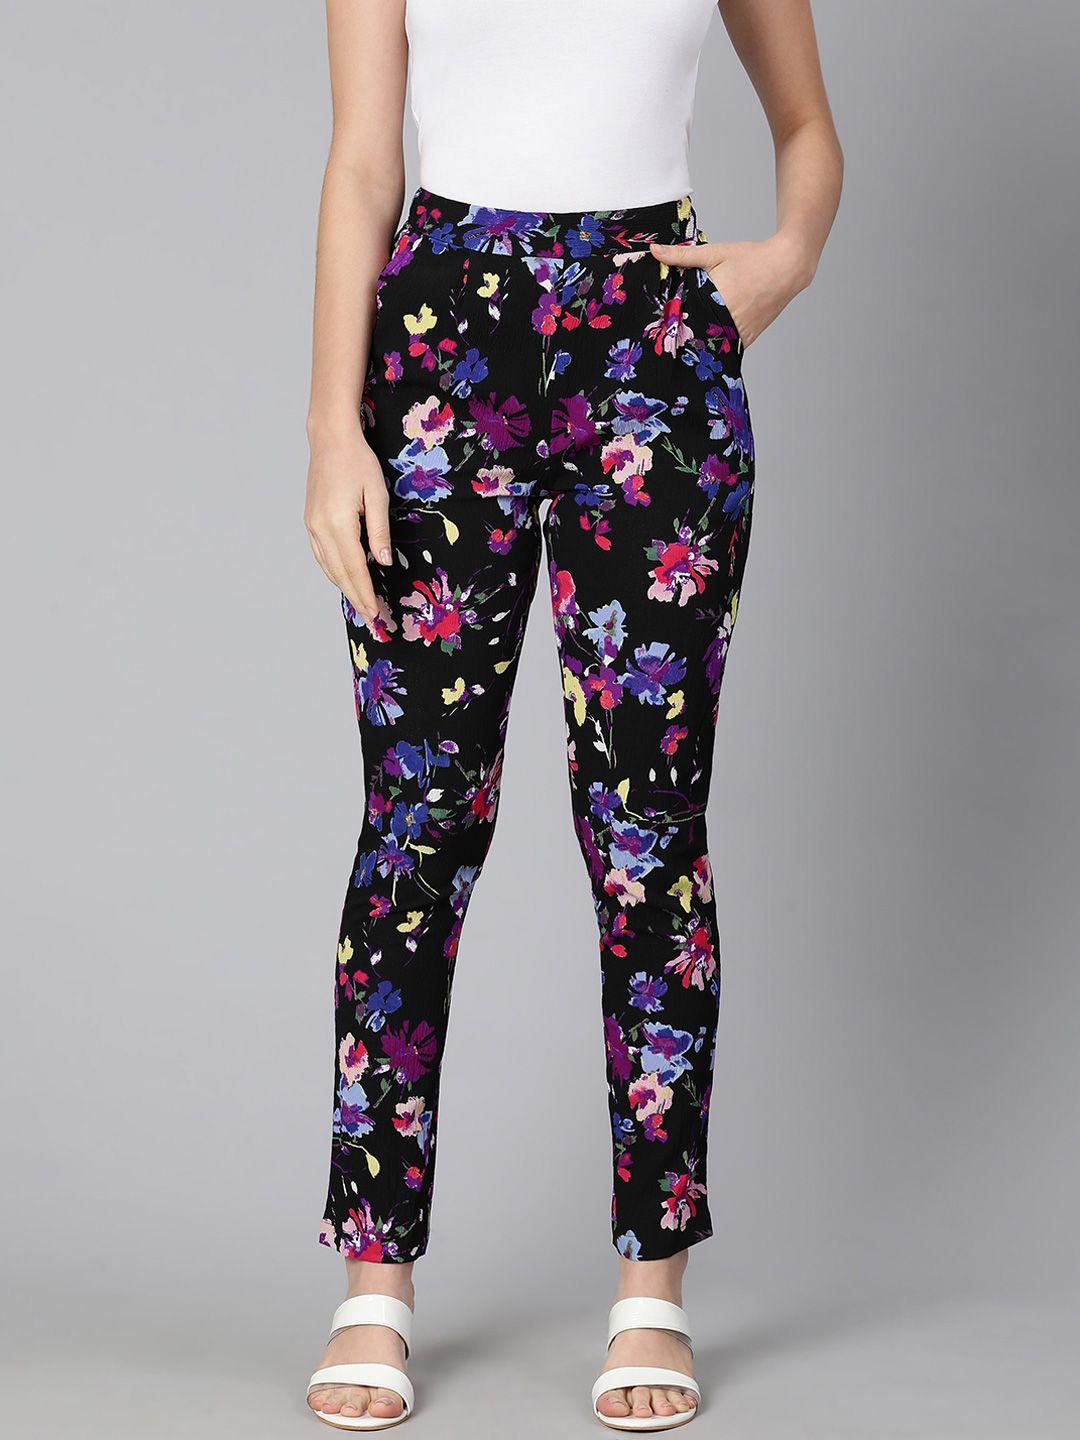 oxolloxo women black floral printed slim fit trousers